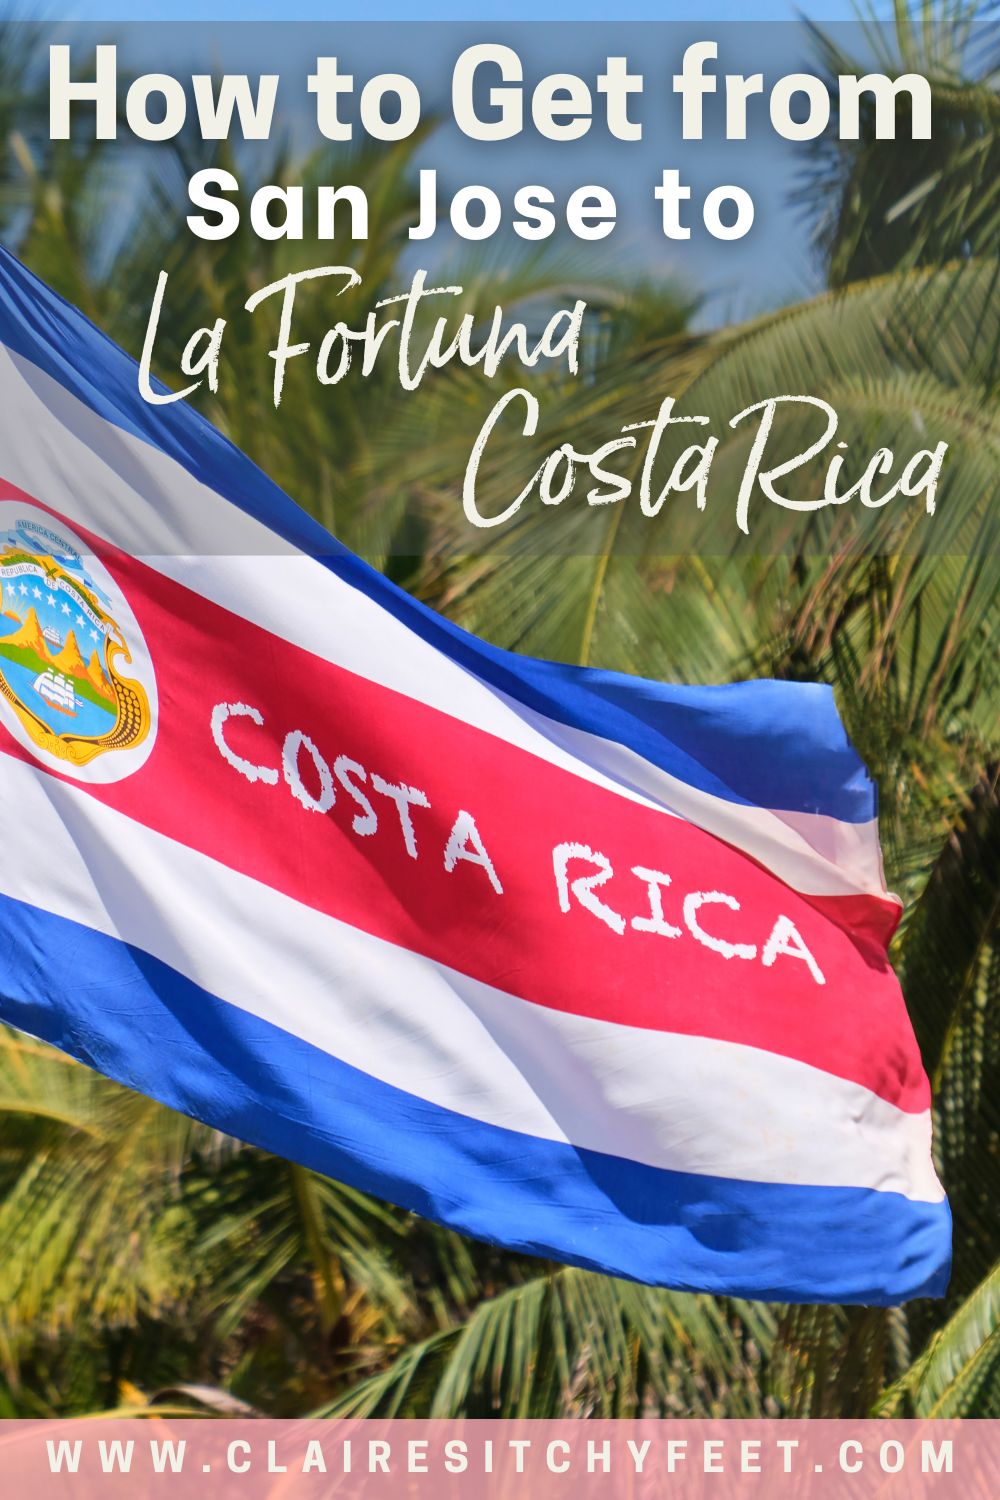 Costa Rica Guide | How to get from San Jose to La Fortuna Costa Rica